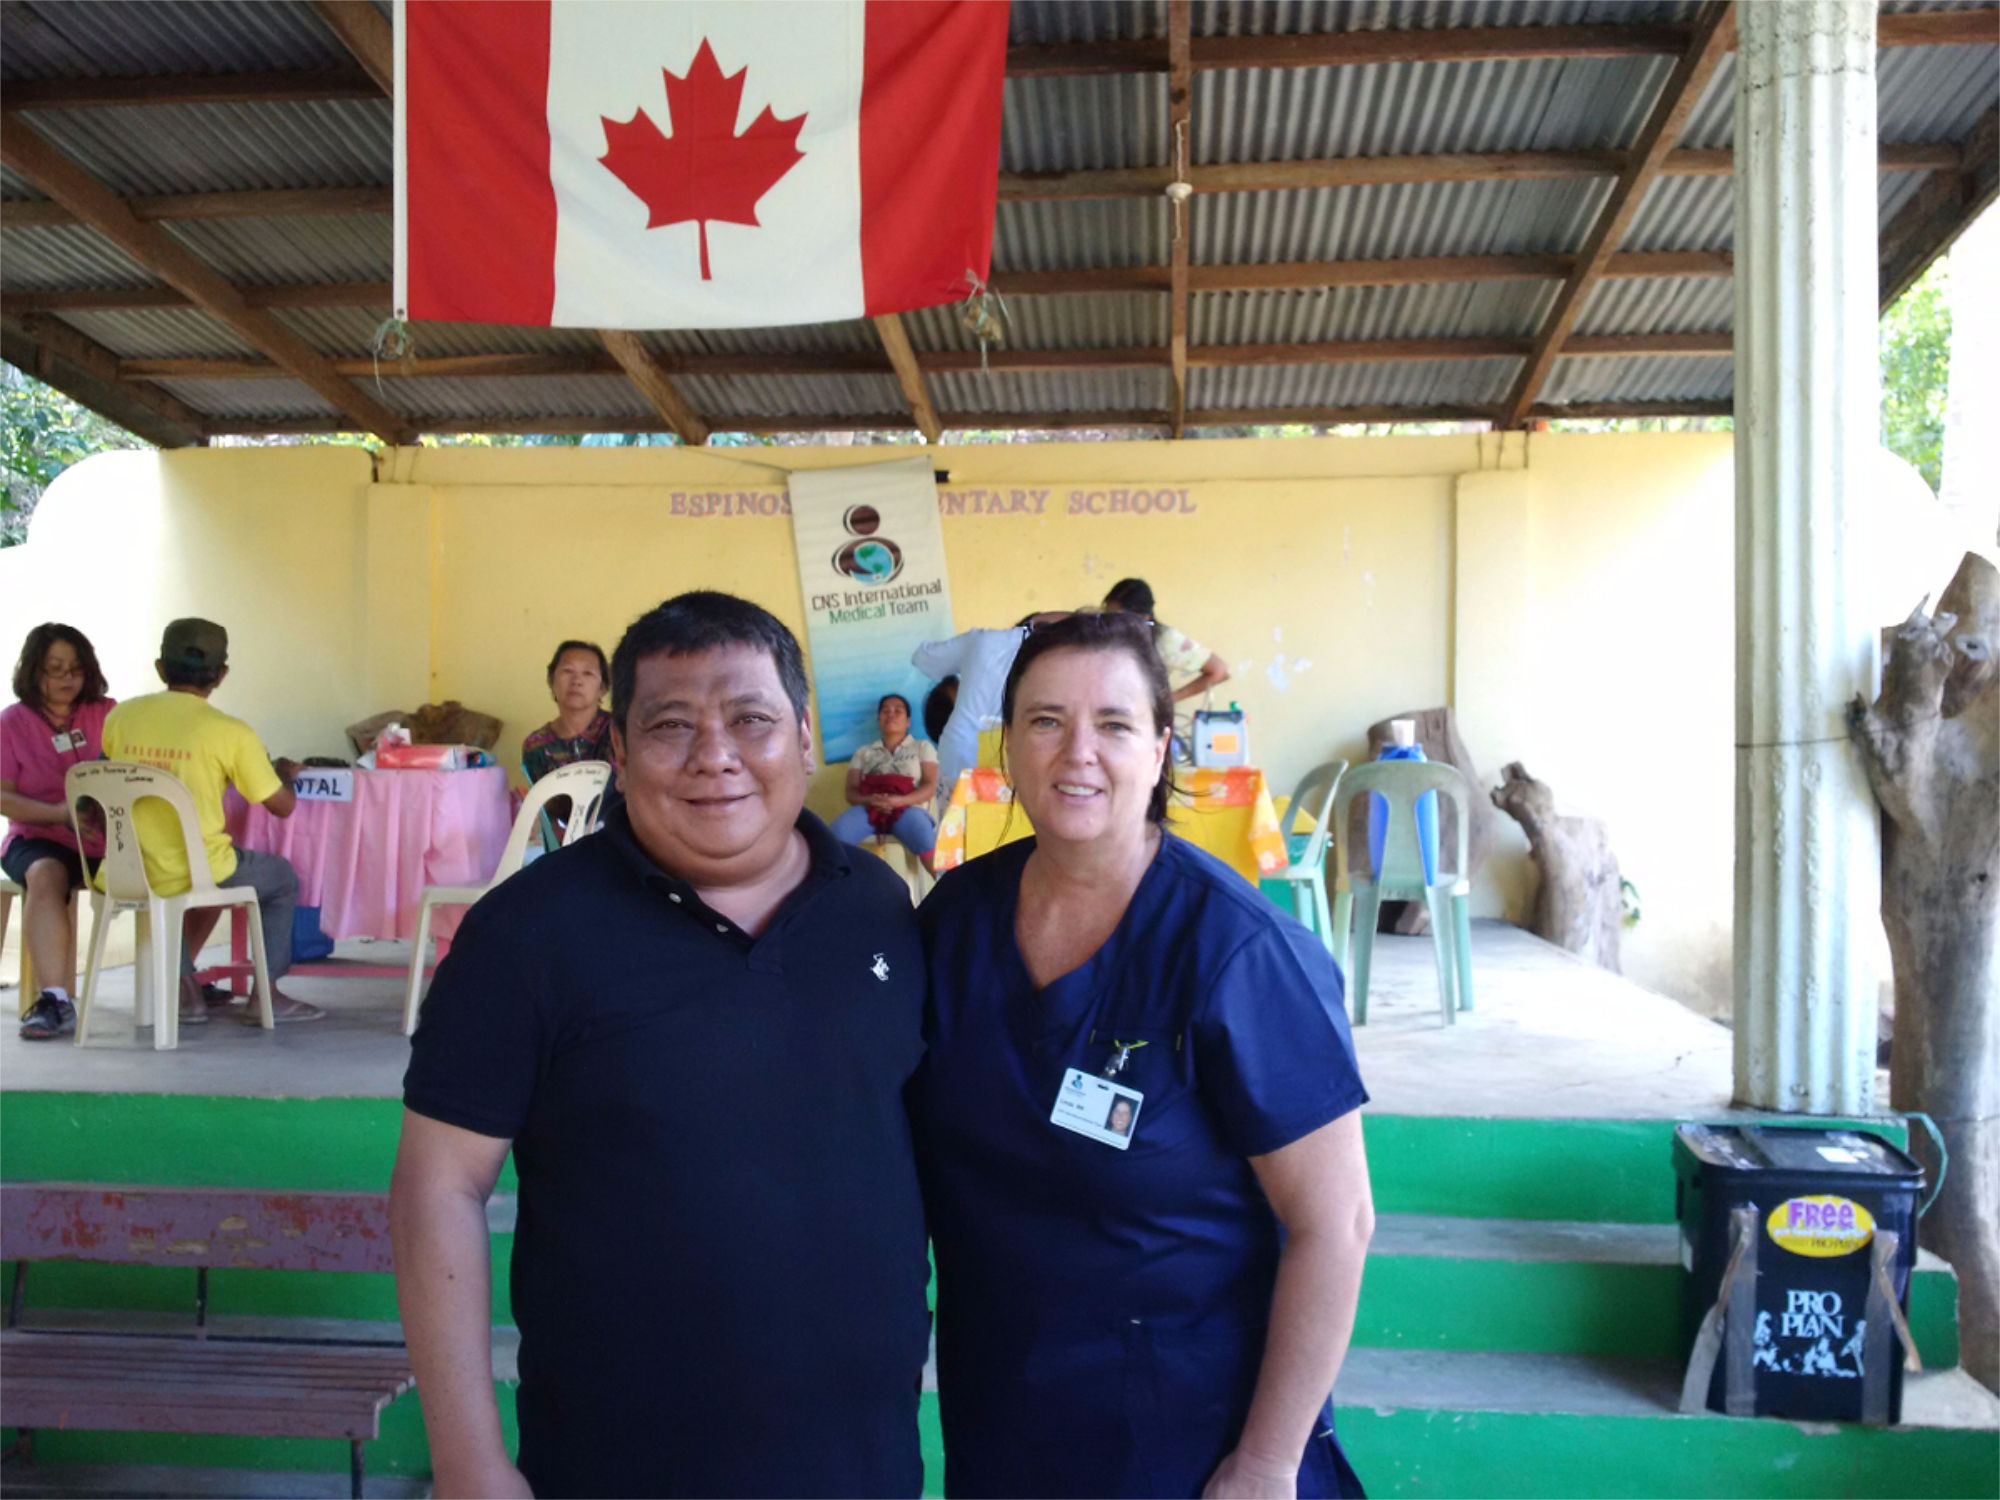 Patient and nurse posing for a picture under a canadian flag at a community nursing event